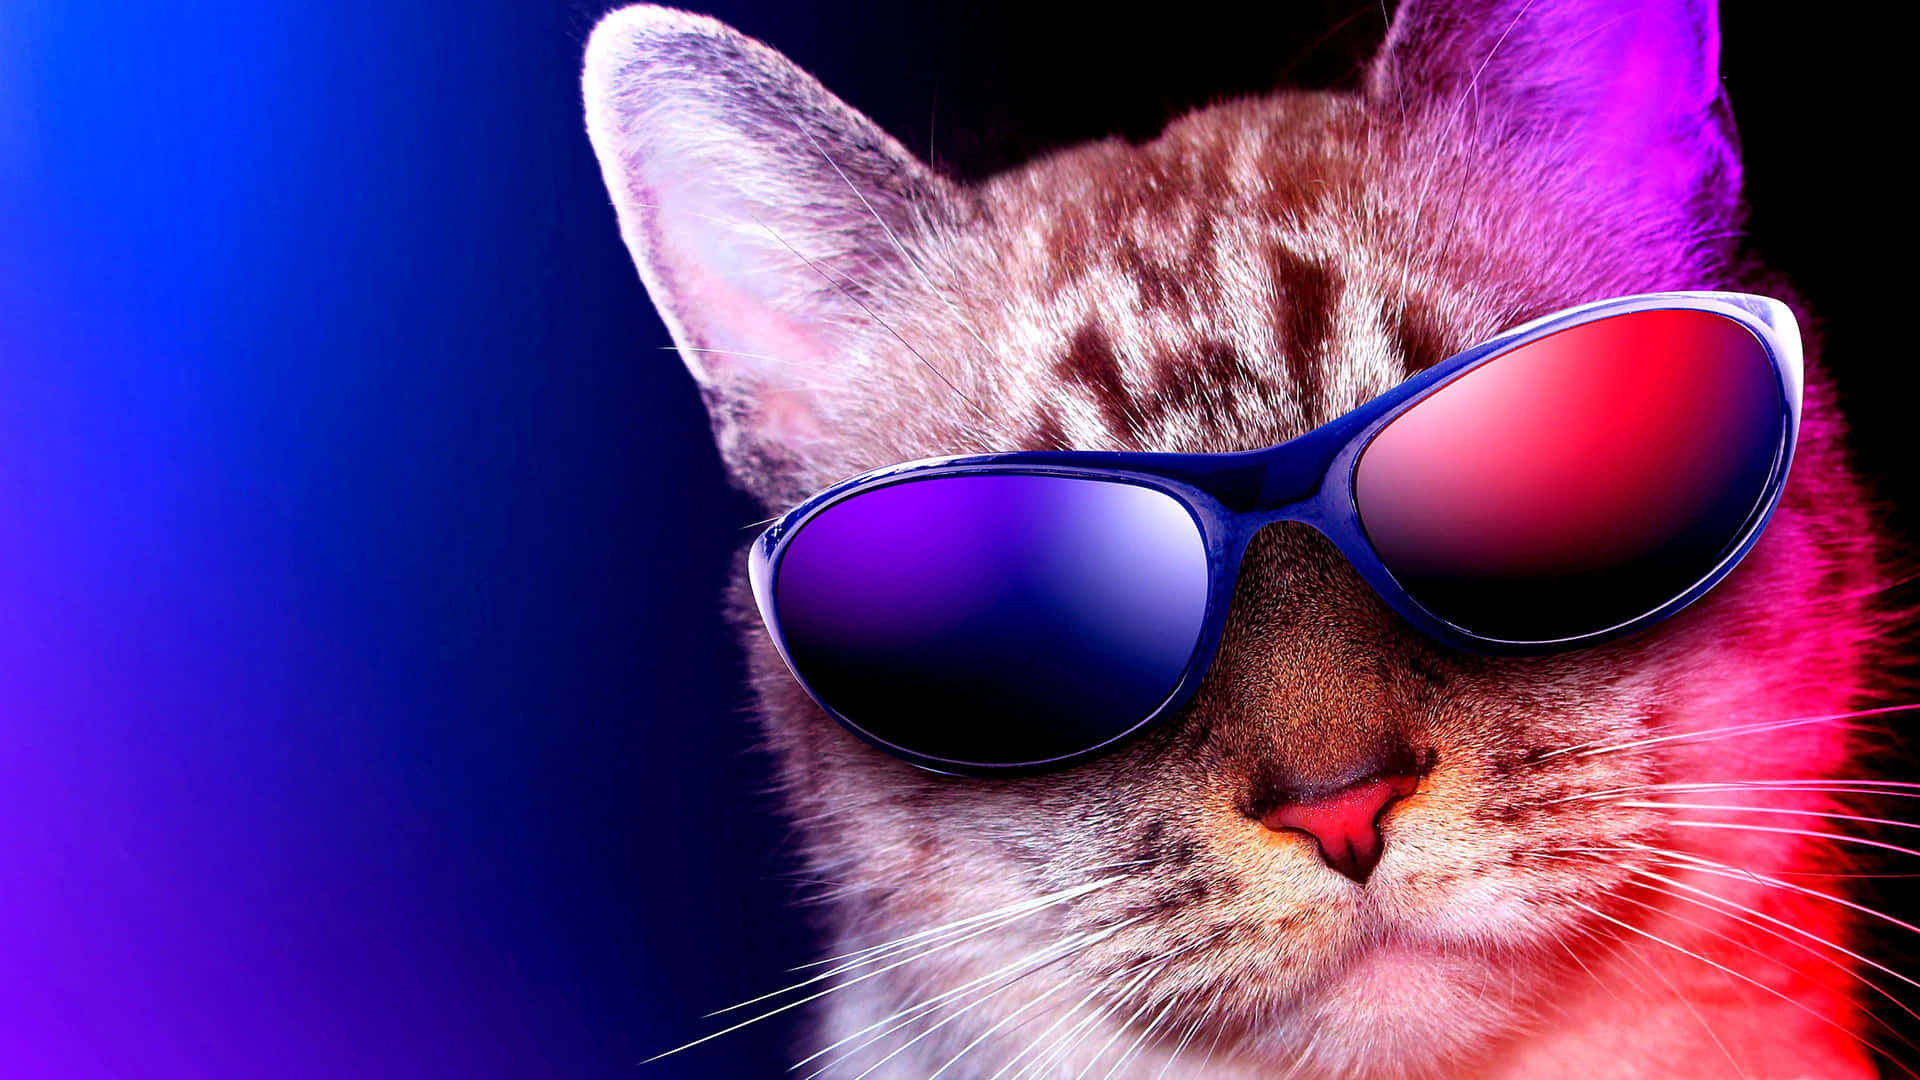 A Cat Wearing Sunglasses Background